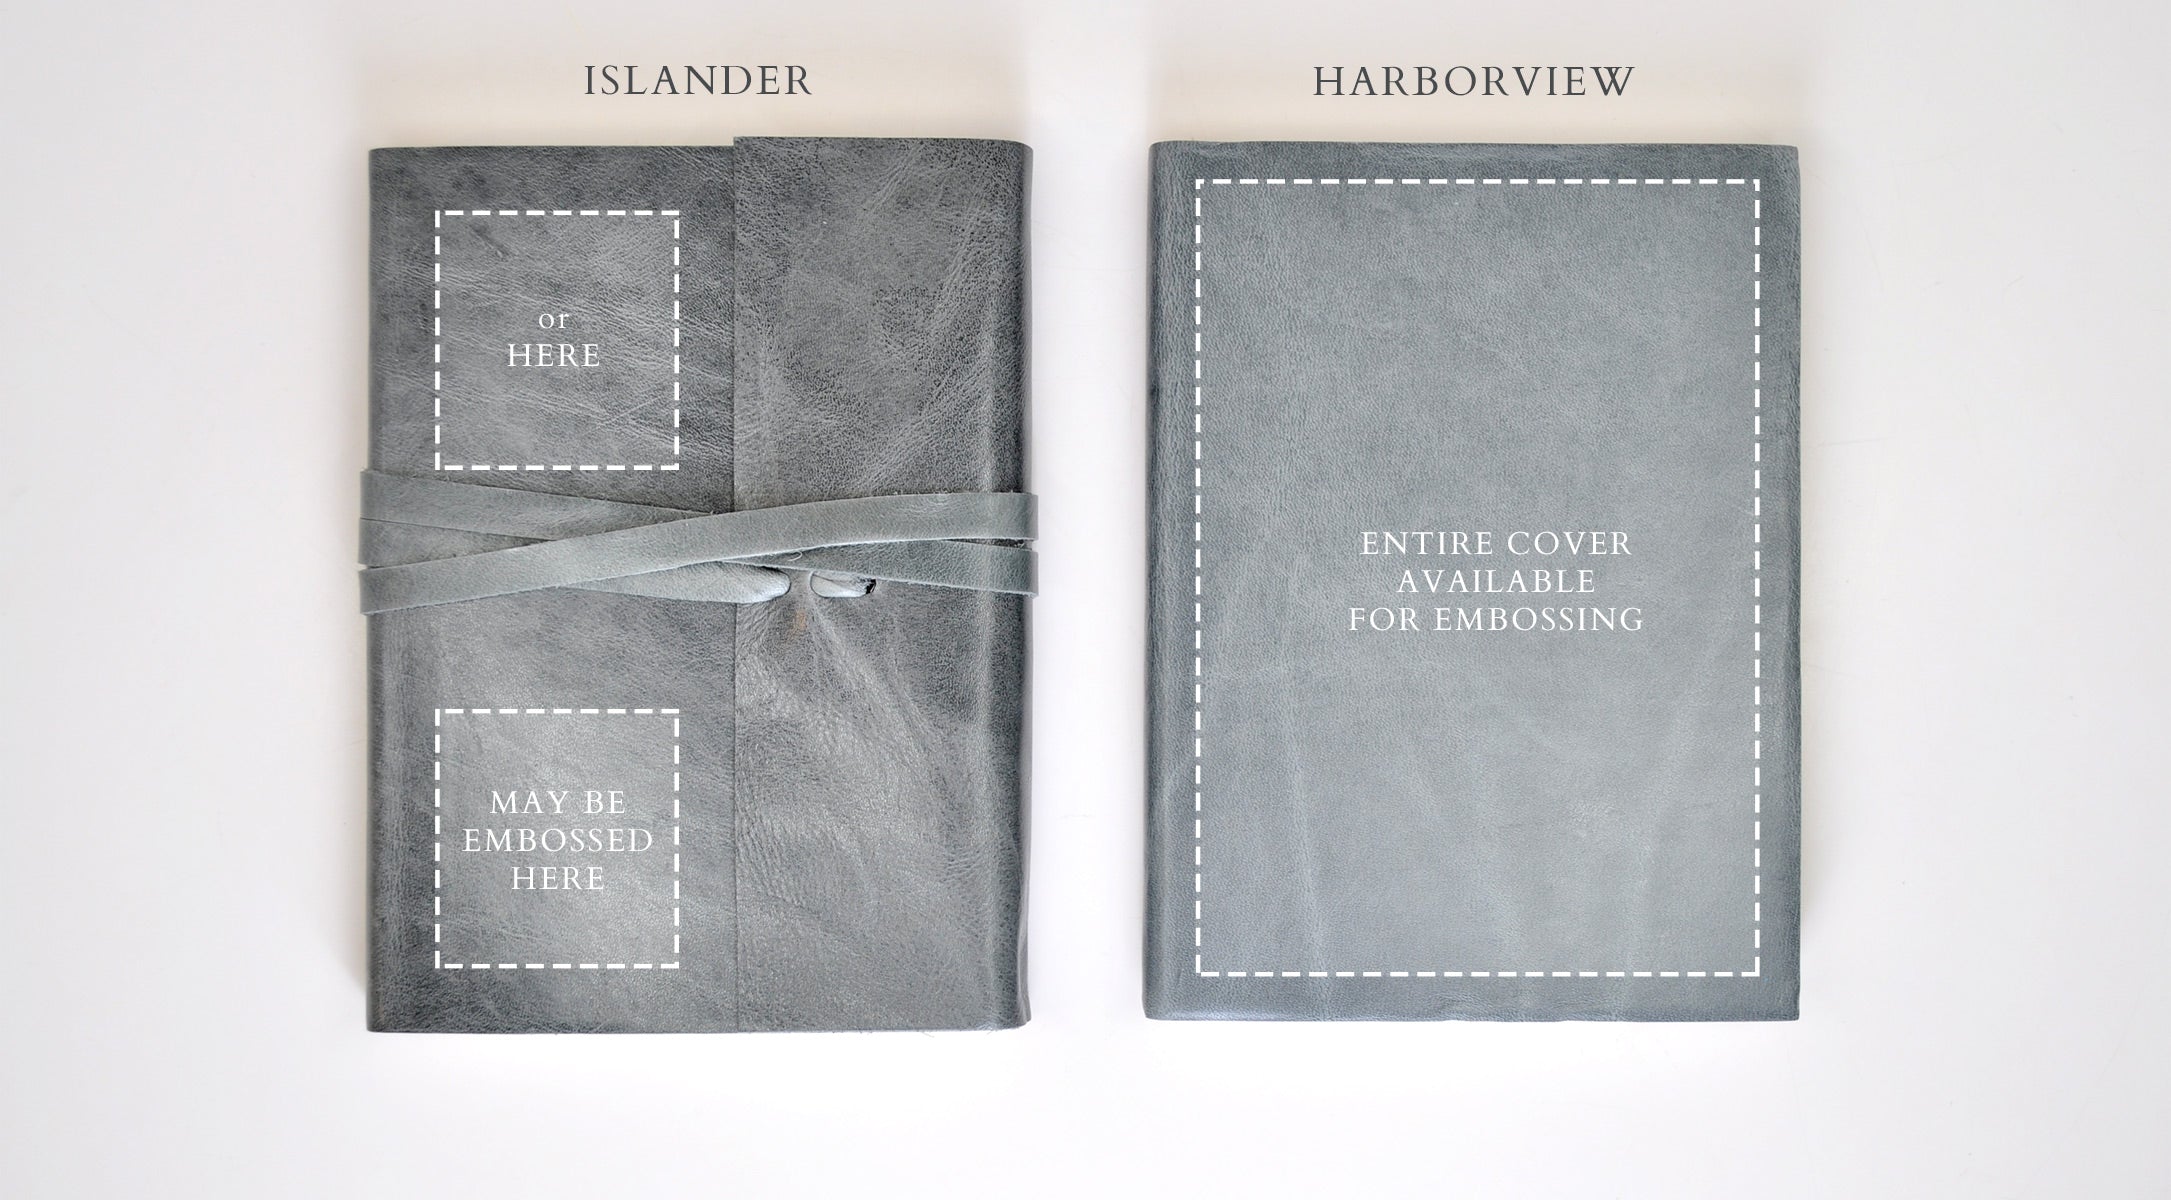 Areas available for embossing on Harborview and Islander Leather Journals.